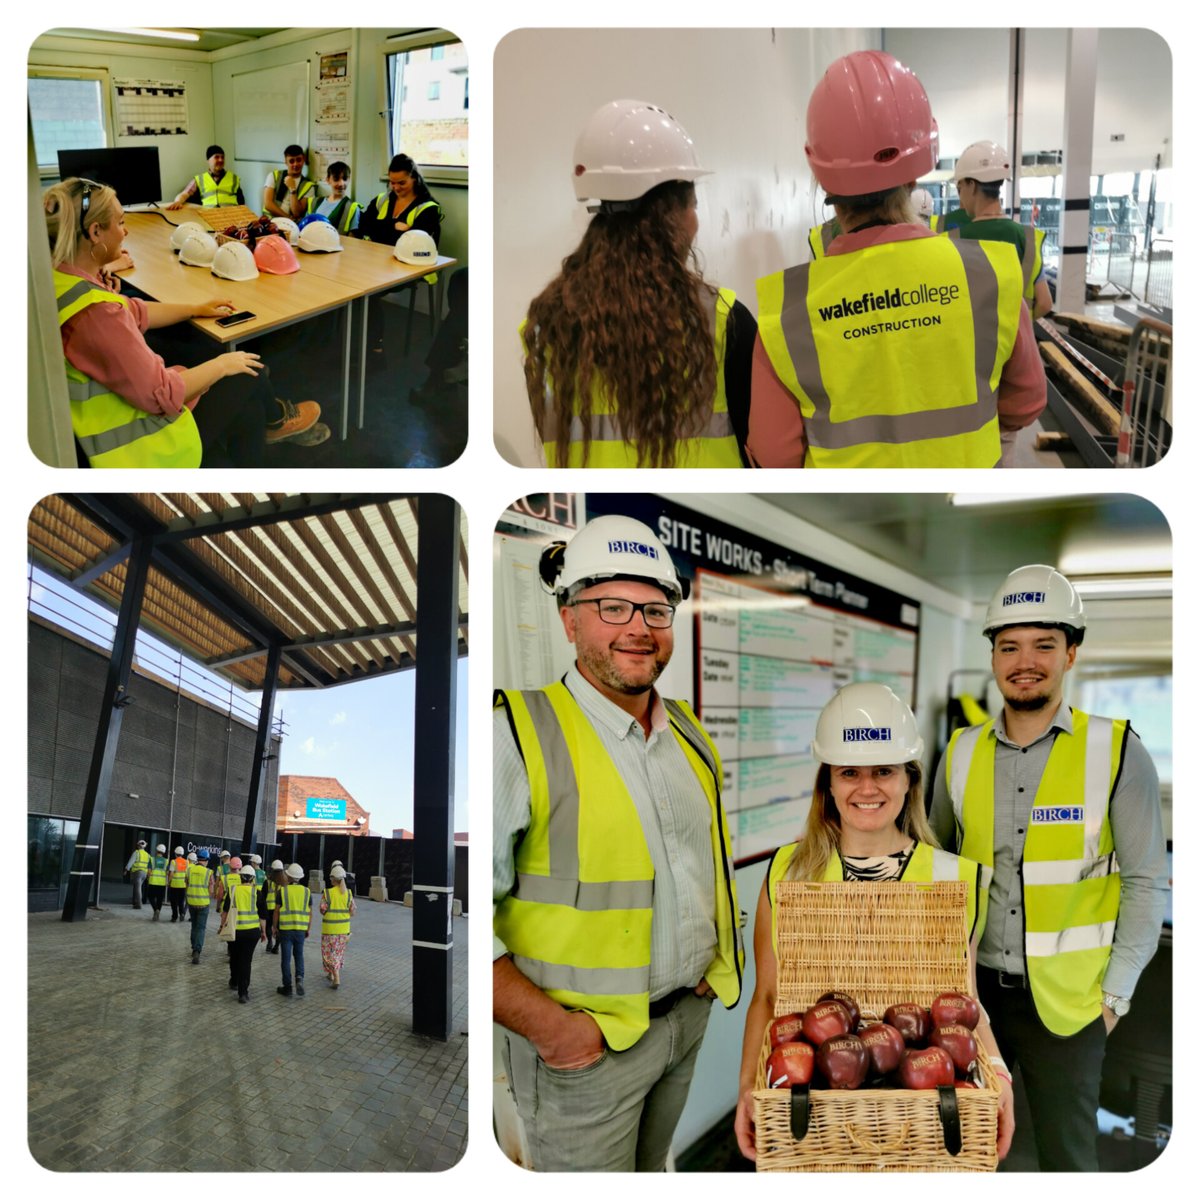 School’s nearly out for summer, but a group of Wakefield based dedicated #tlevels students made time to visit our #wakefield exchange project before a well-earned rest! They were joined by Cllr Masterman, Deputy Cabinet Member for Culture, Leisure & Sport for a guided tour